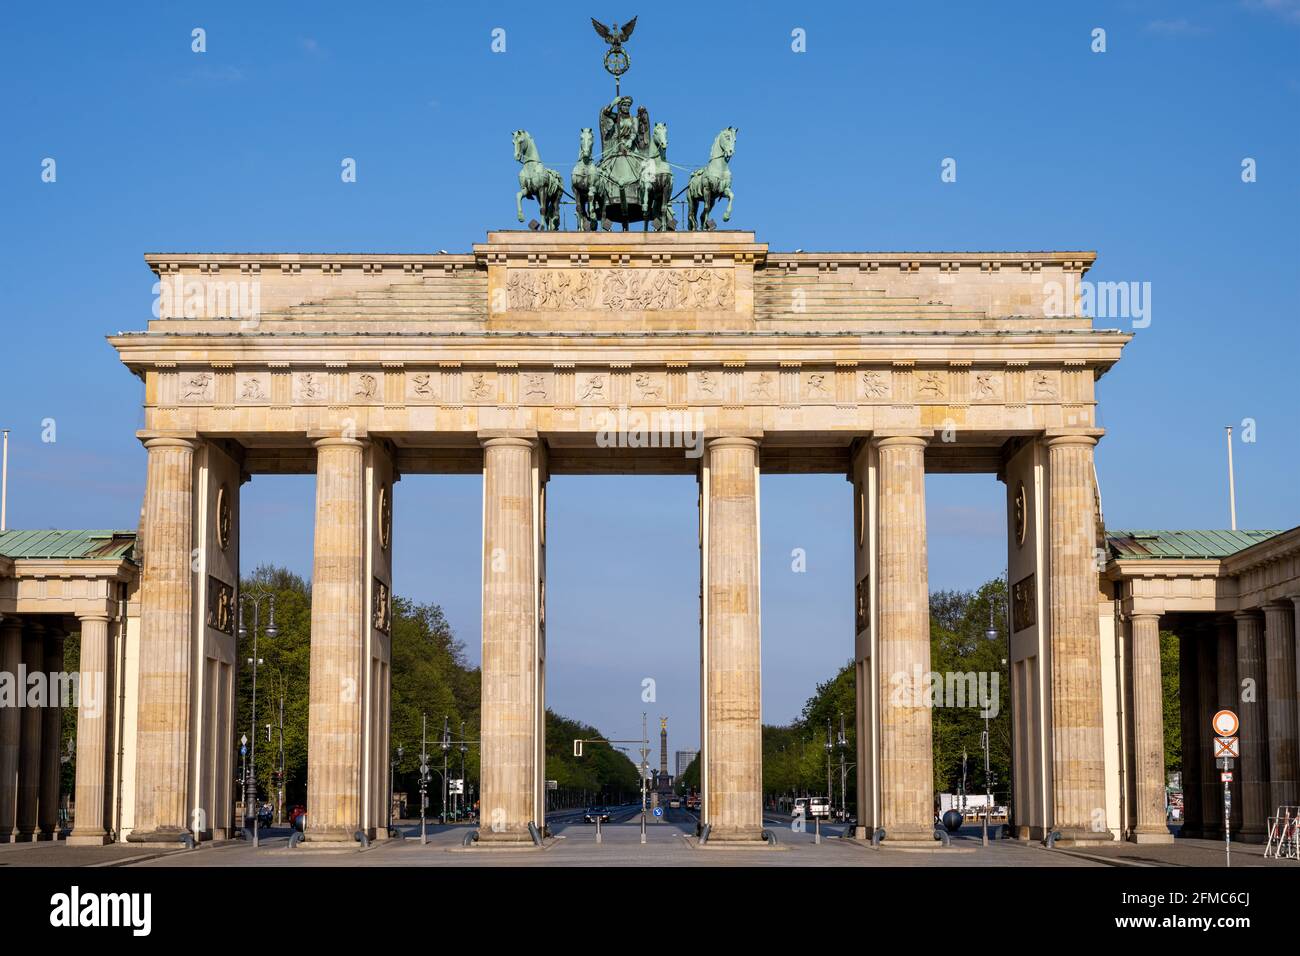 The famous Brandenburg Gate in Berlin early in the morning with no people Stock Photo